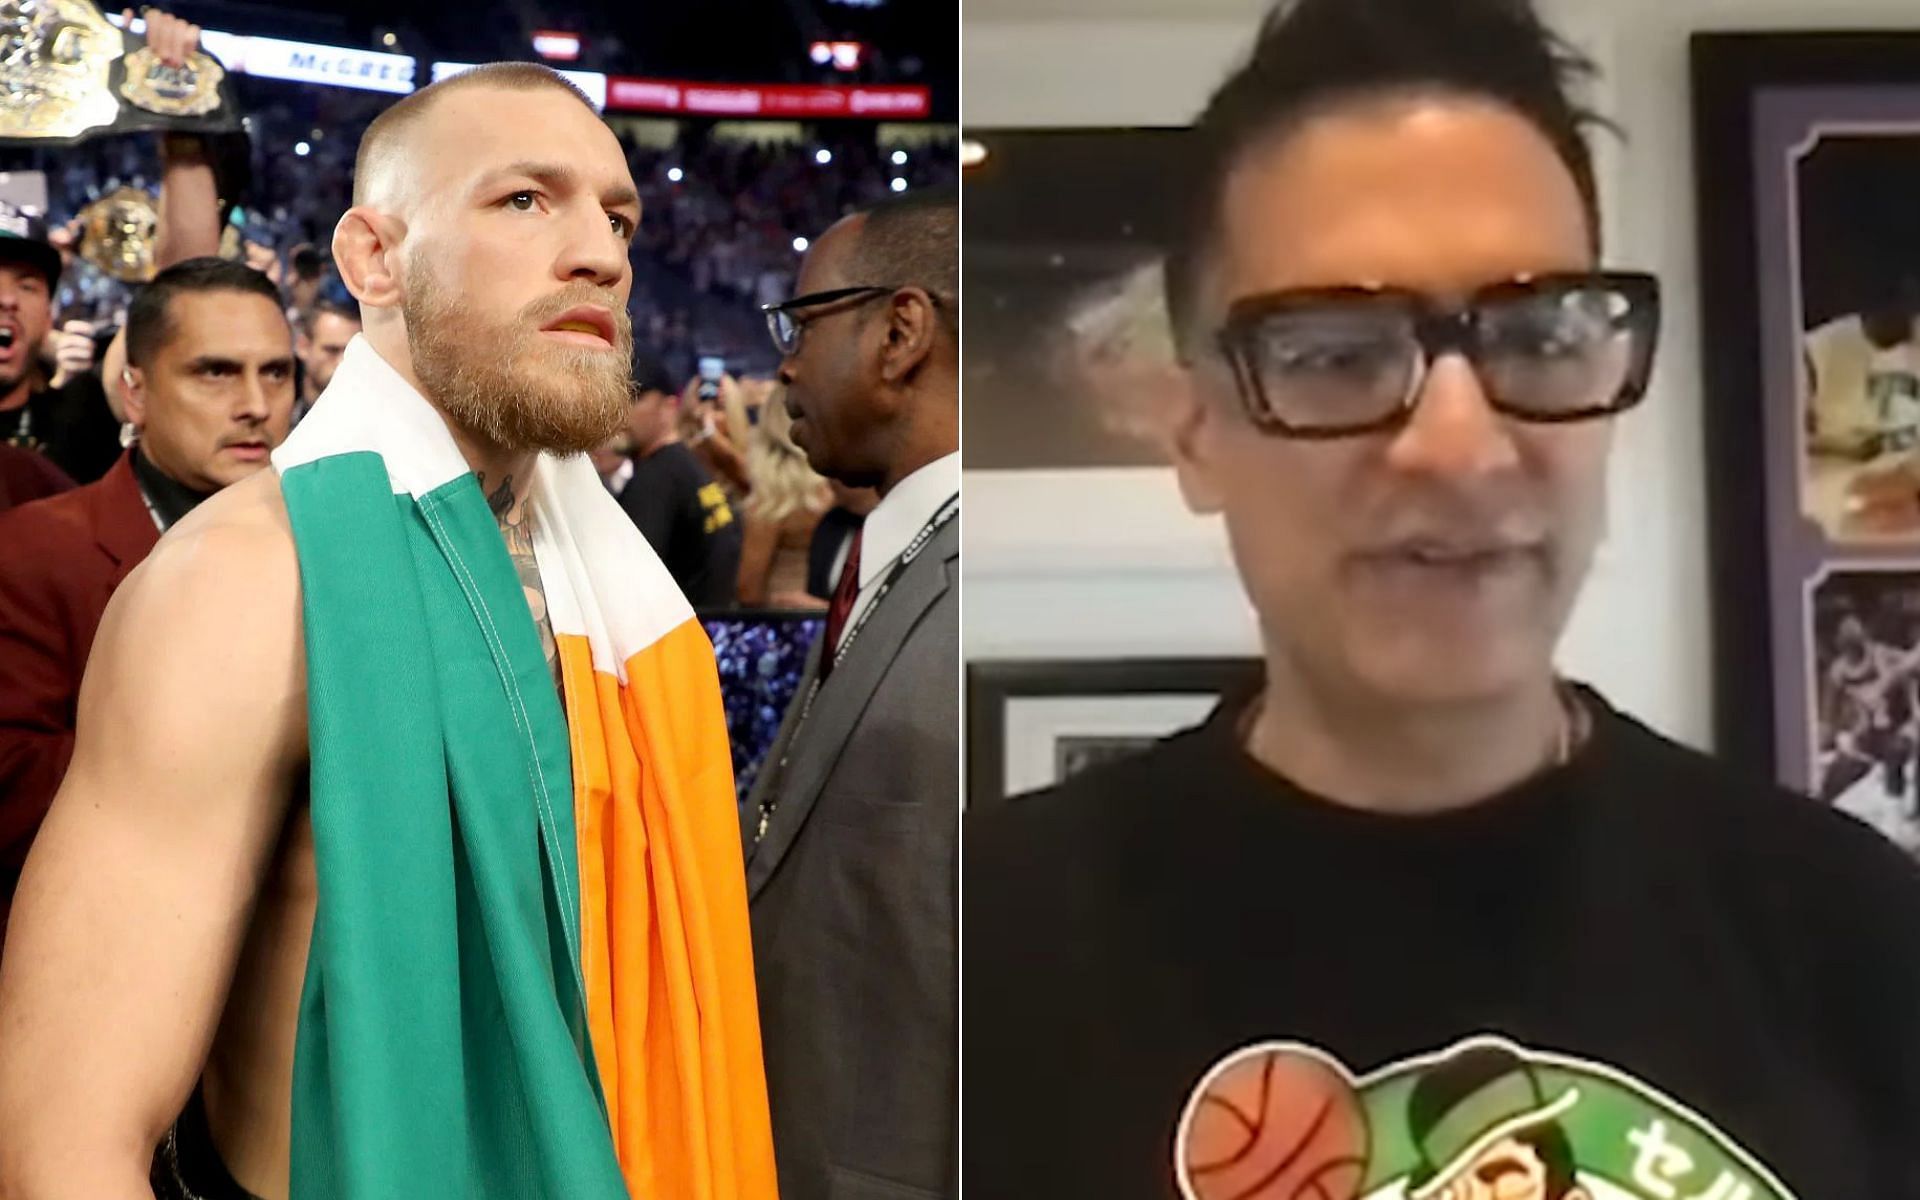 Conor McGregor [Left], and Gotham Chopra [Right] [Photo credit: BroBible - YouTube]